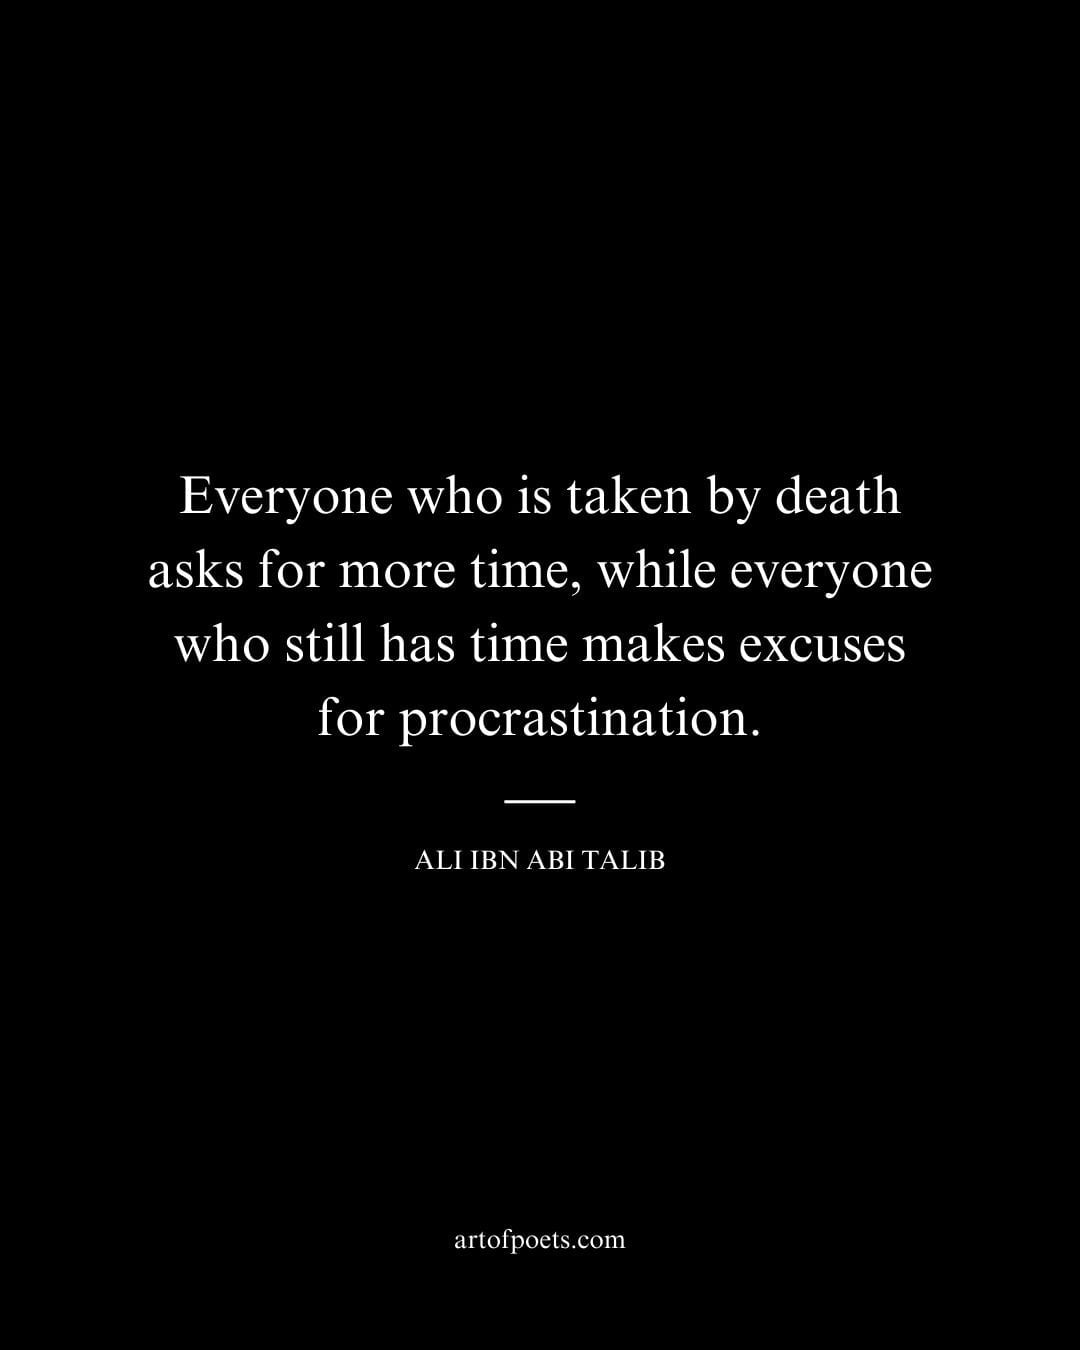 Everyone who is taken by death asks for more time while everyone who still has time makes excuses for procrastination